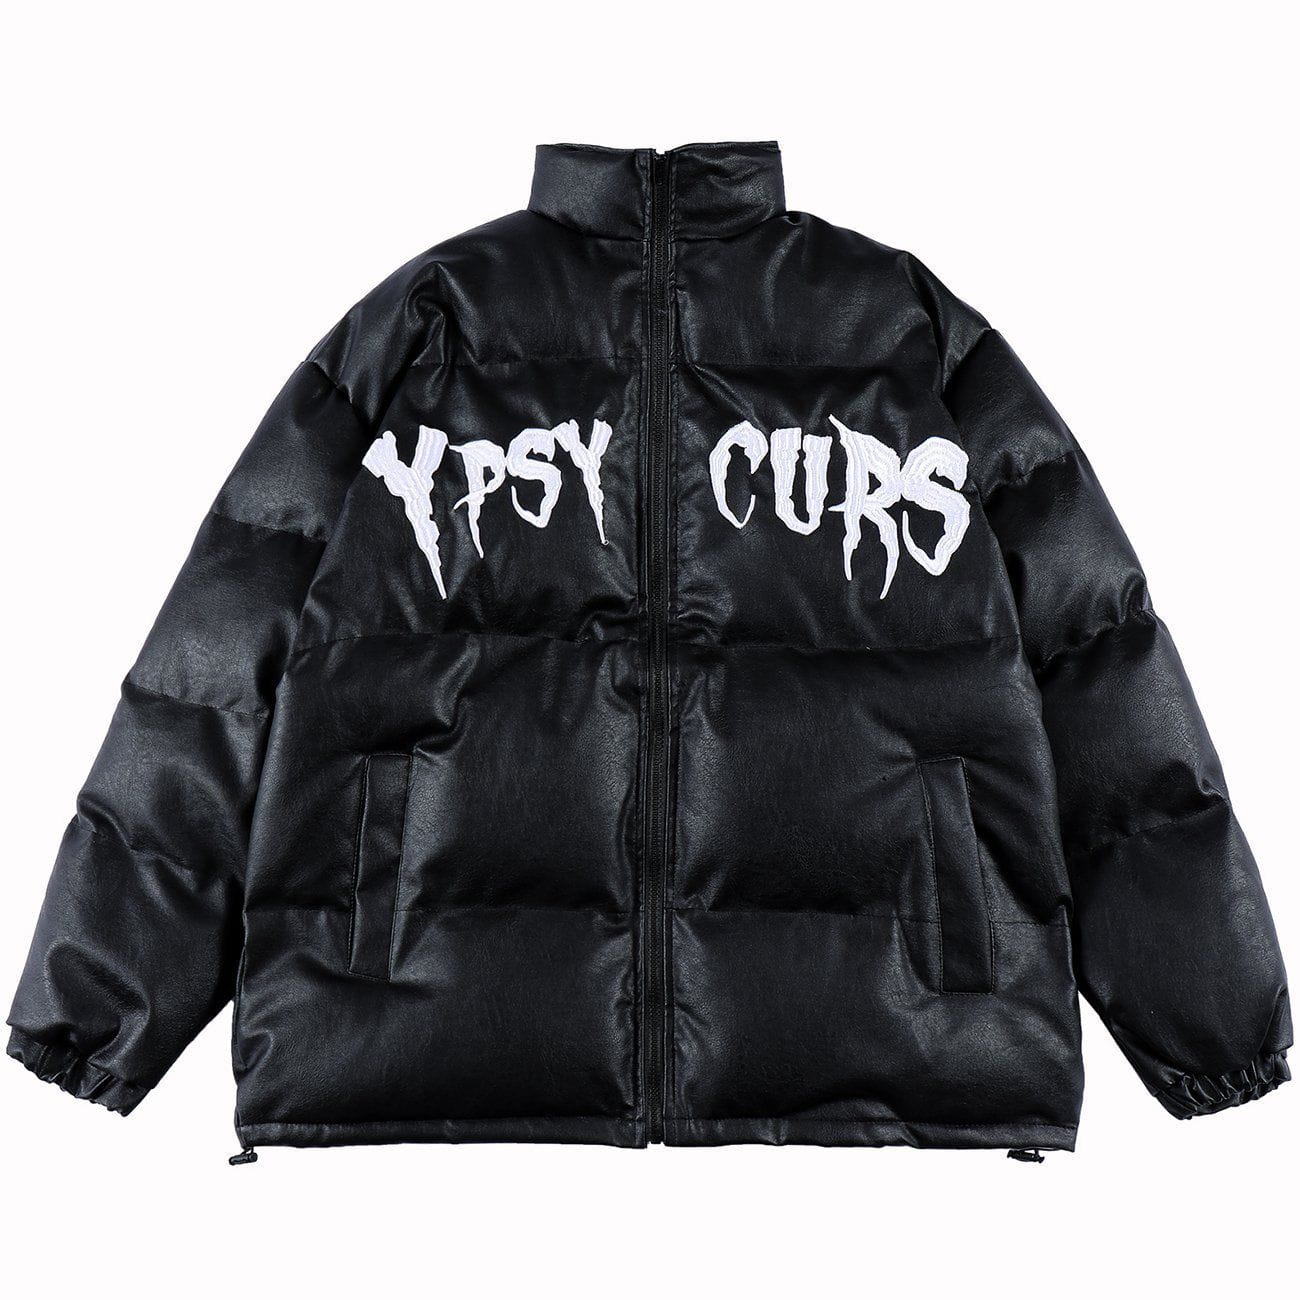 Eprezzy® - Solid Color Textured Embroidery Letters Puffer Jacket Streetwear Fashion - eprezzy.com